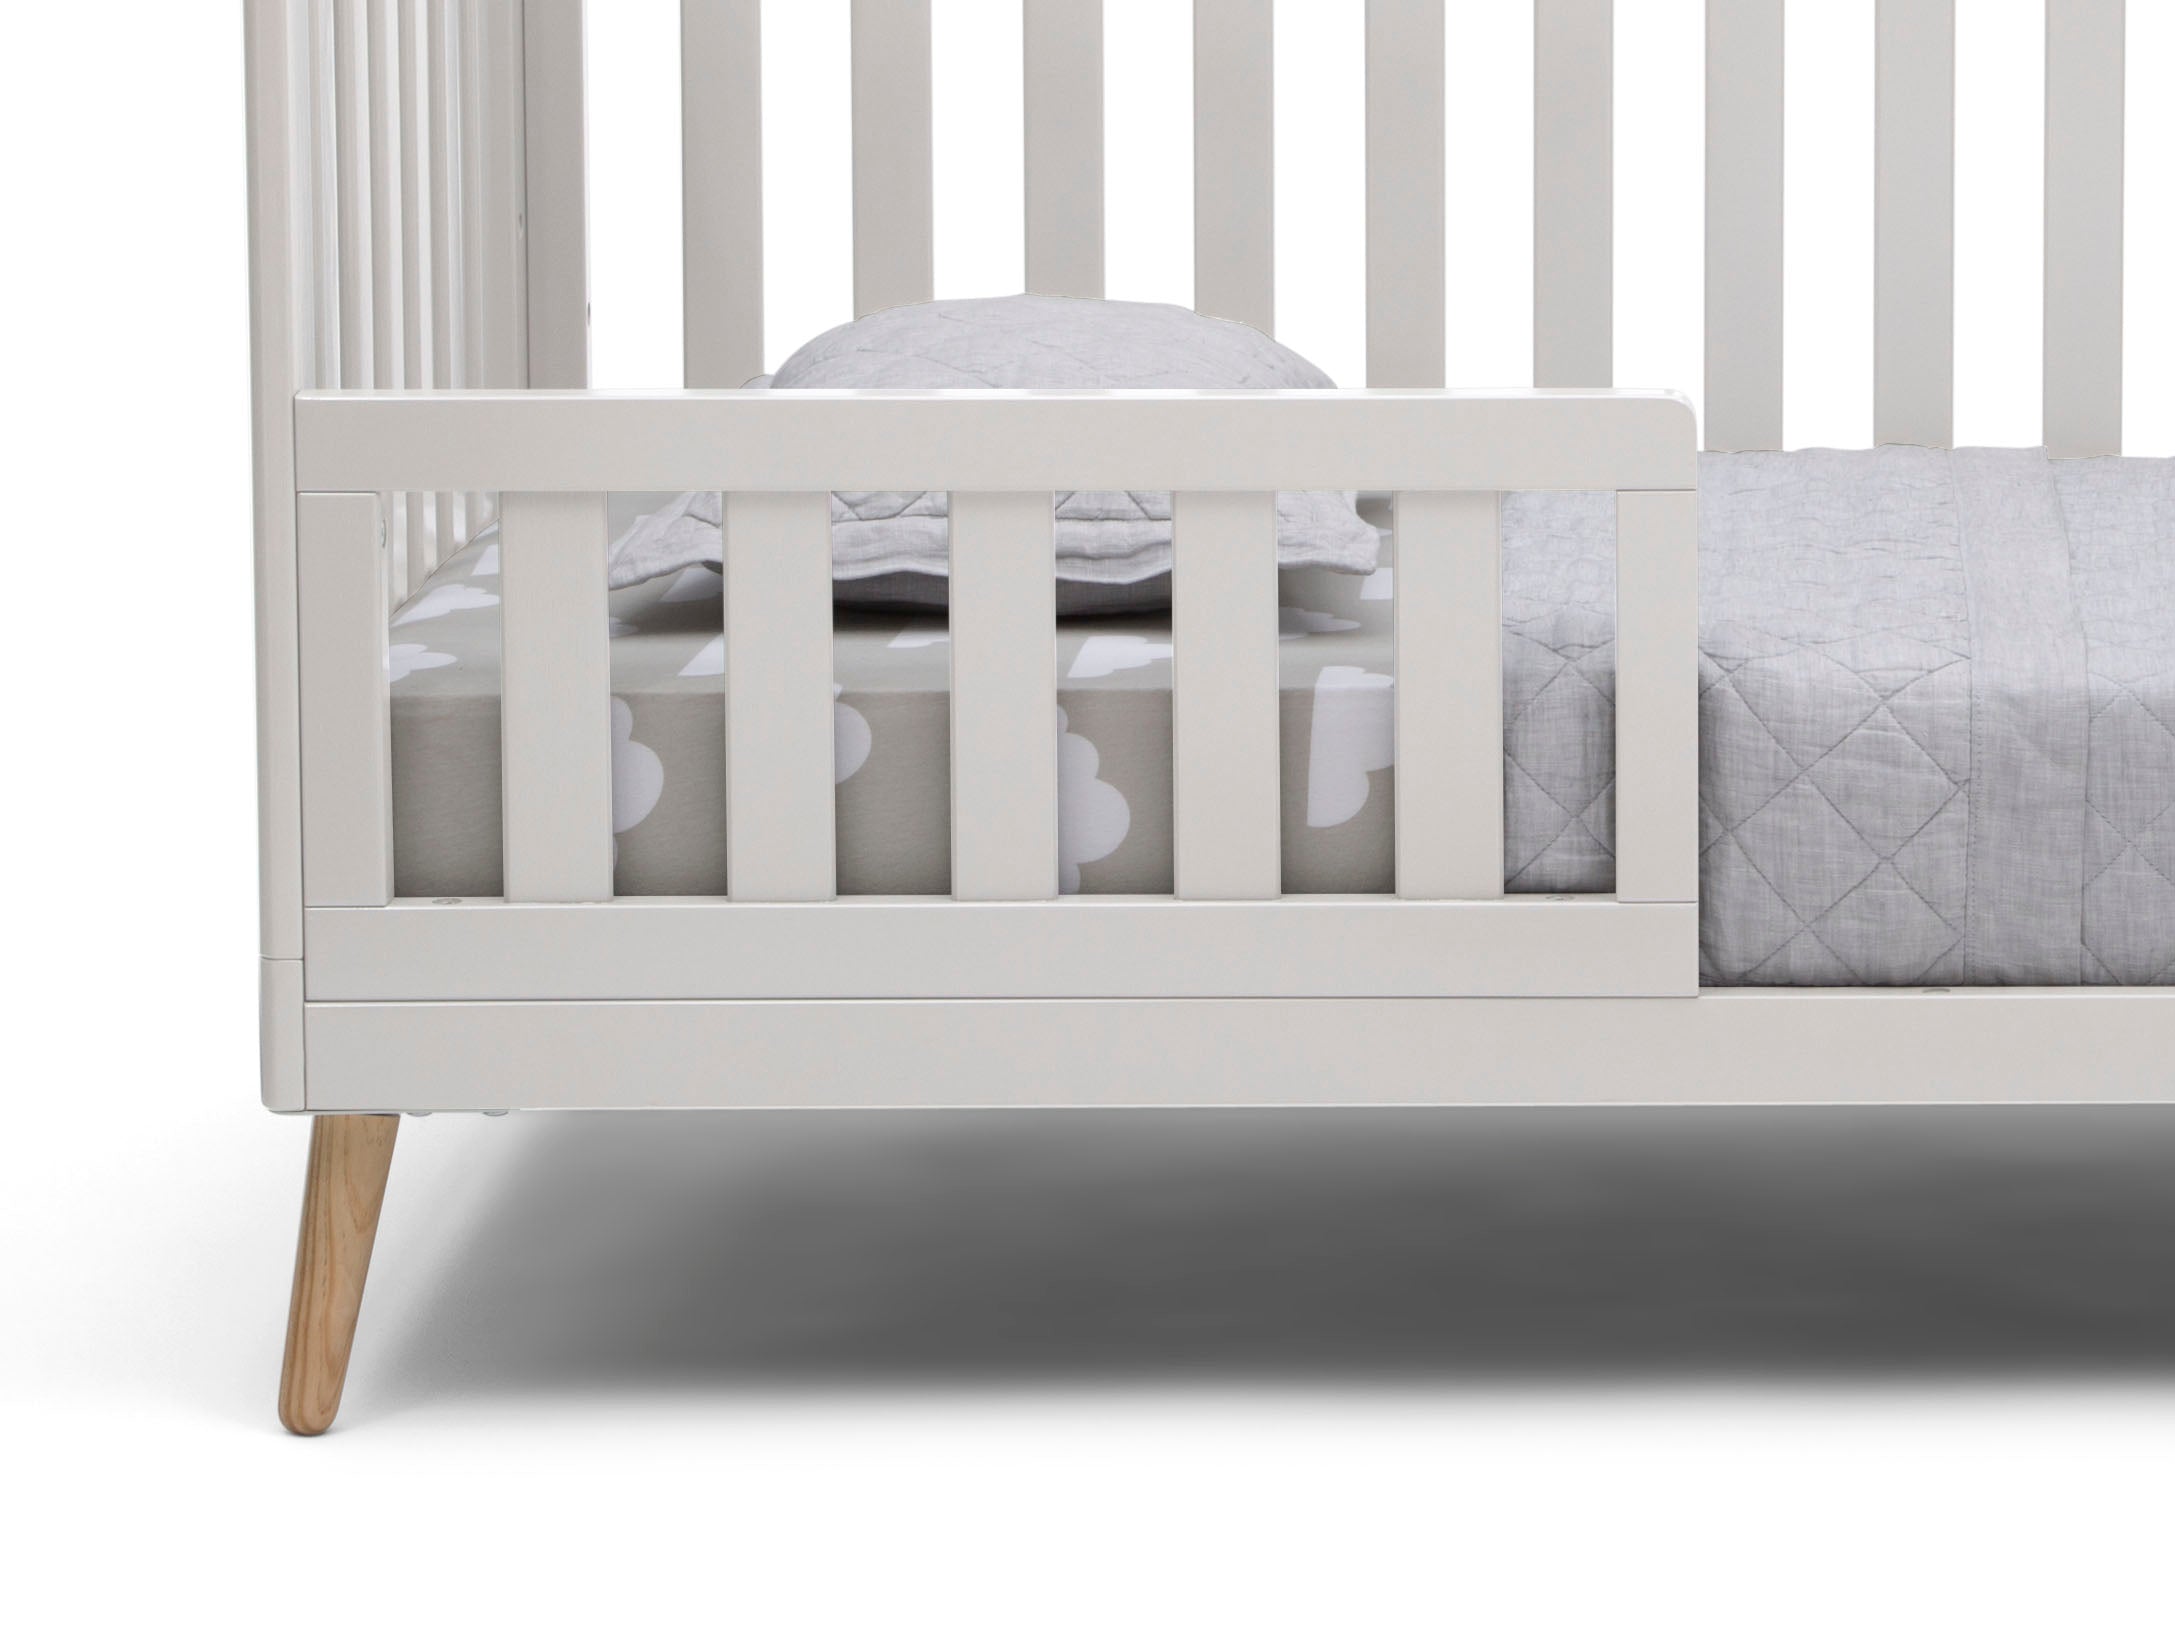 white twin bed with rails